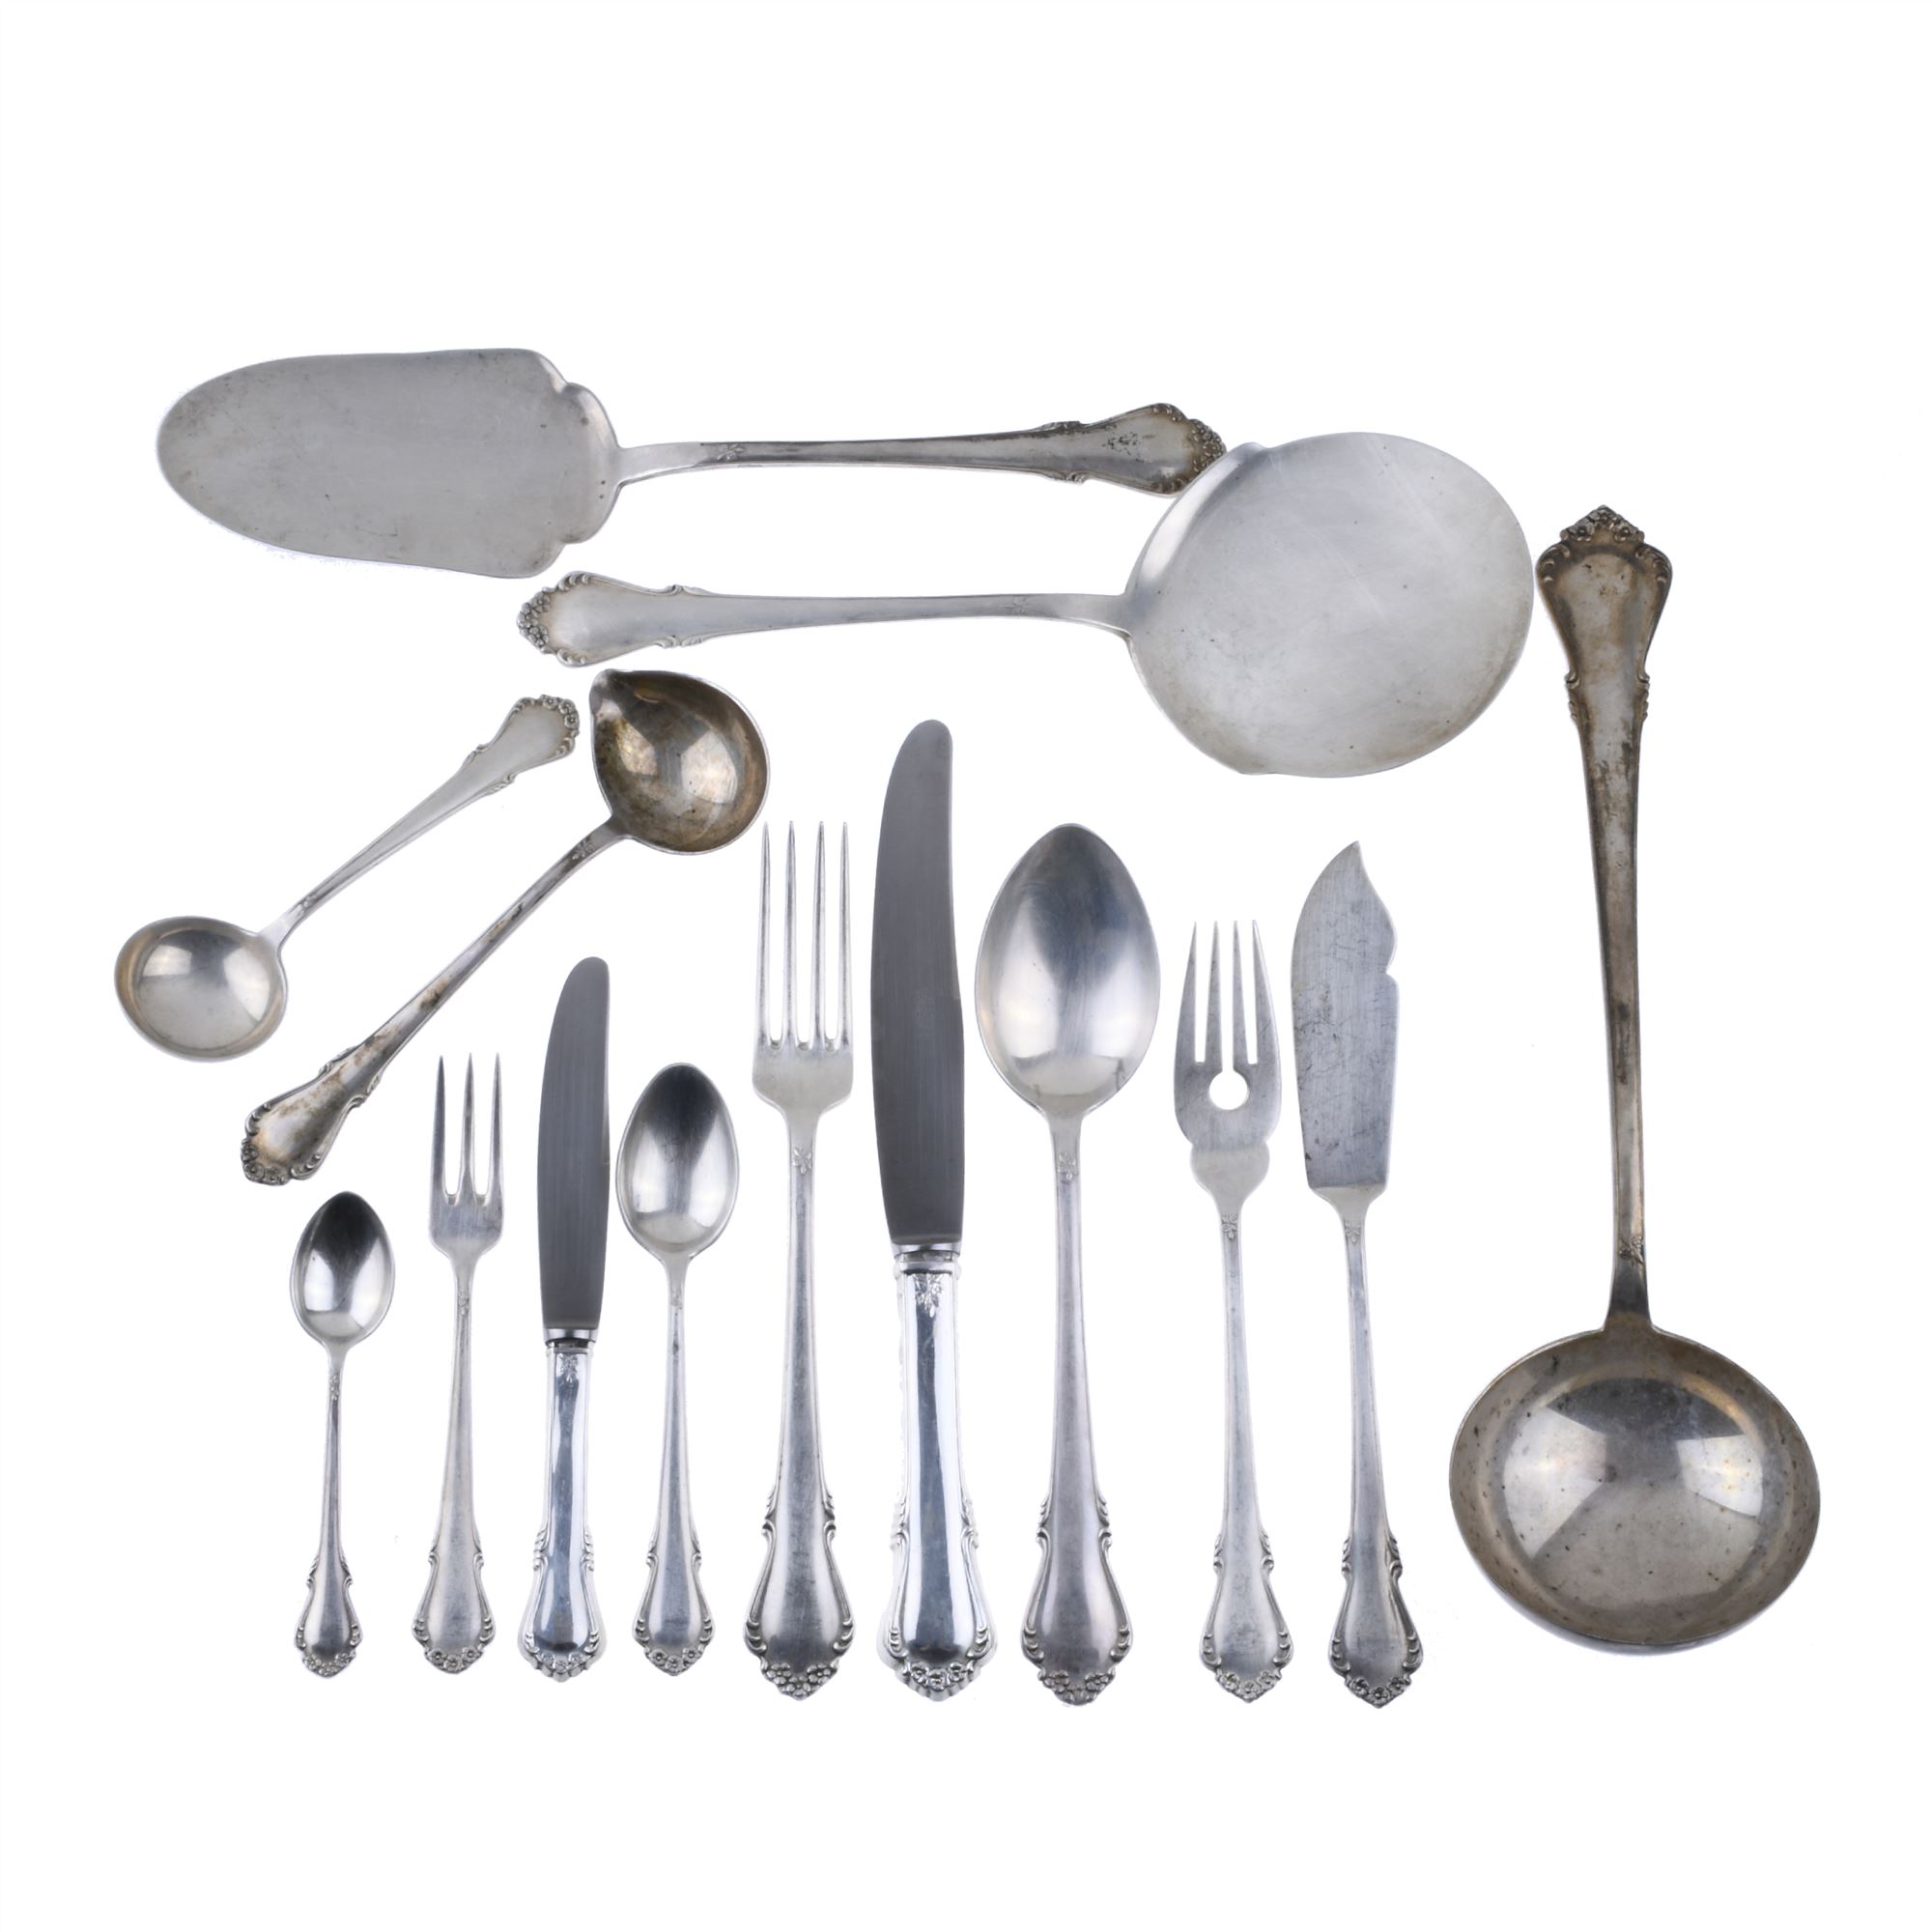 SPANISH CUTLERY FOR TWELVE SERVICES IN SILVER, MID 20TH CEN